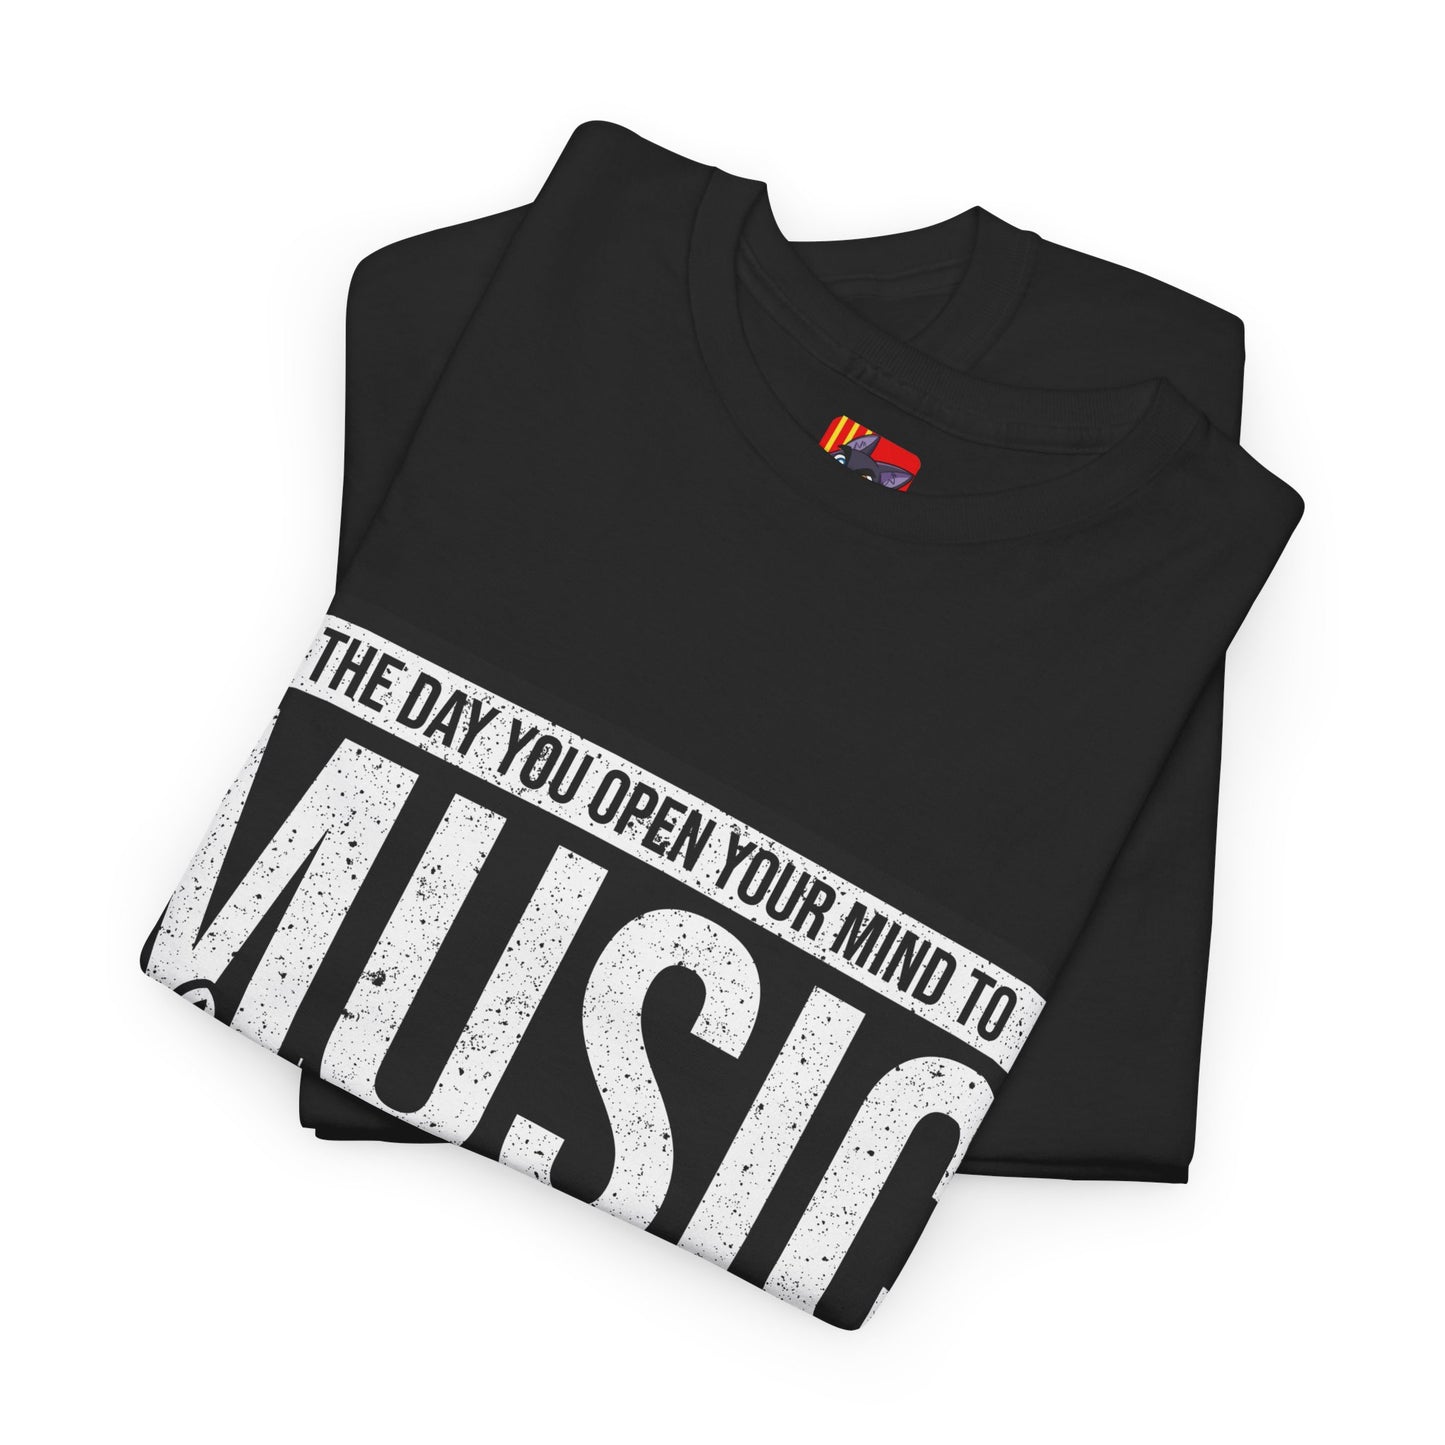 Music: The Language of Connection - Quote Tee The day you open your mind to music